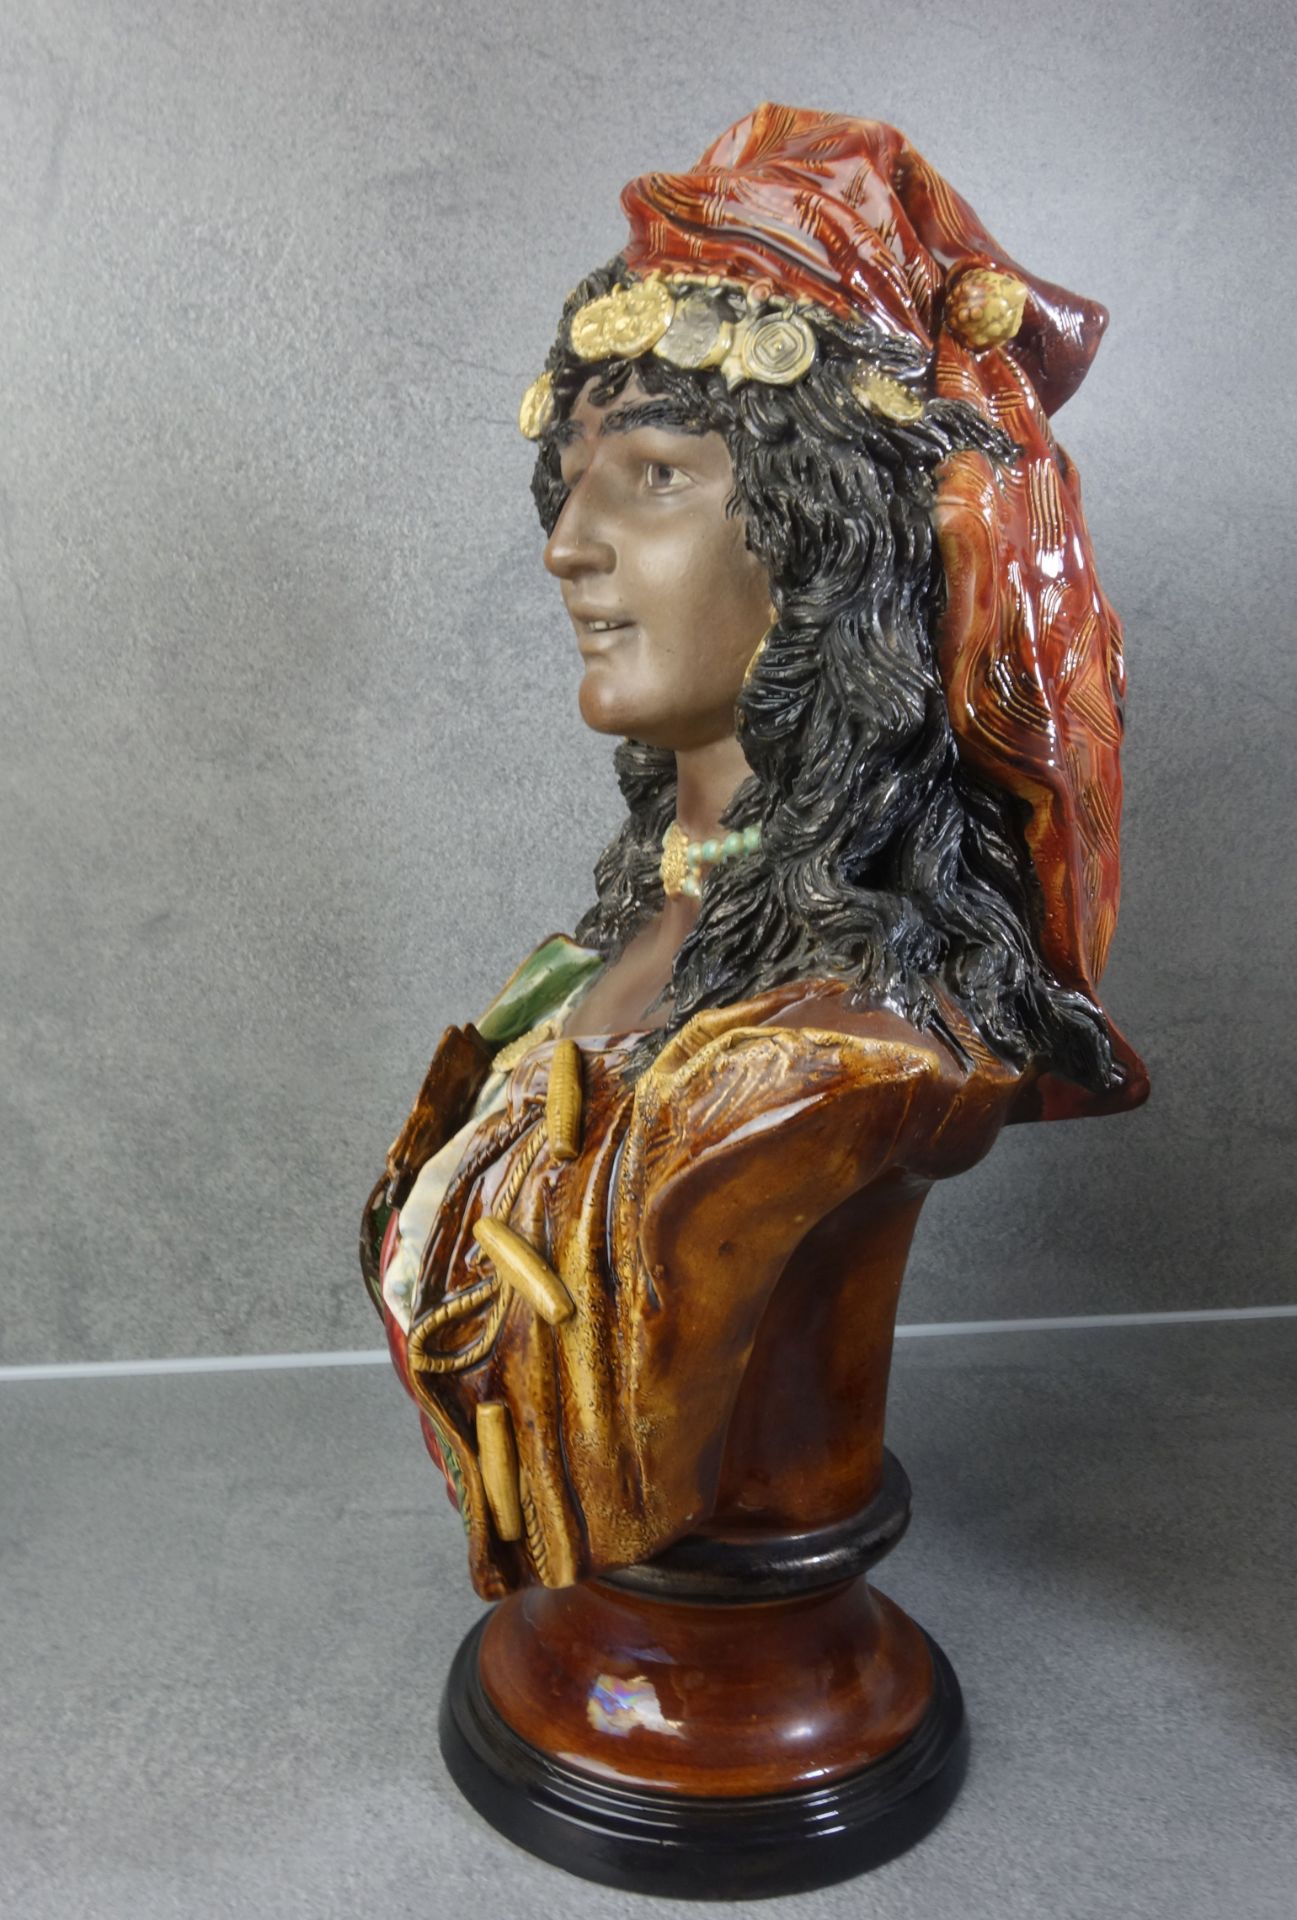 R. STURM SCULPTURES: "MUSICIAN" AND "FORTUNE TELLER" - Image 4 of 6